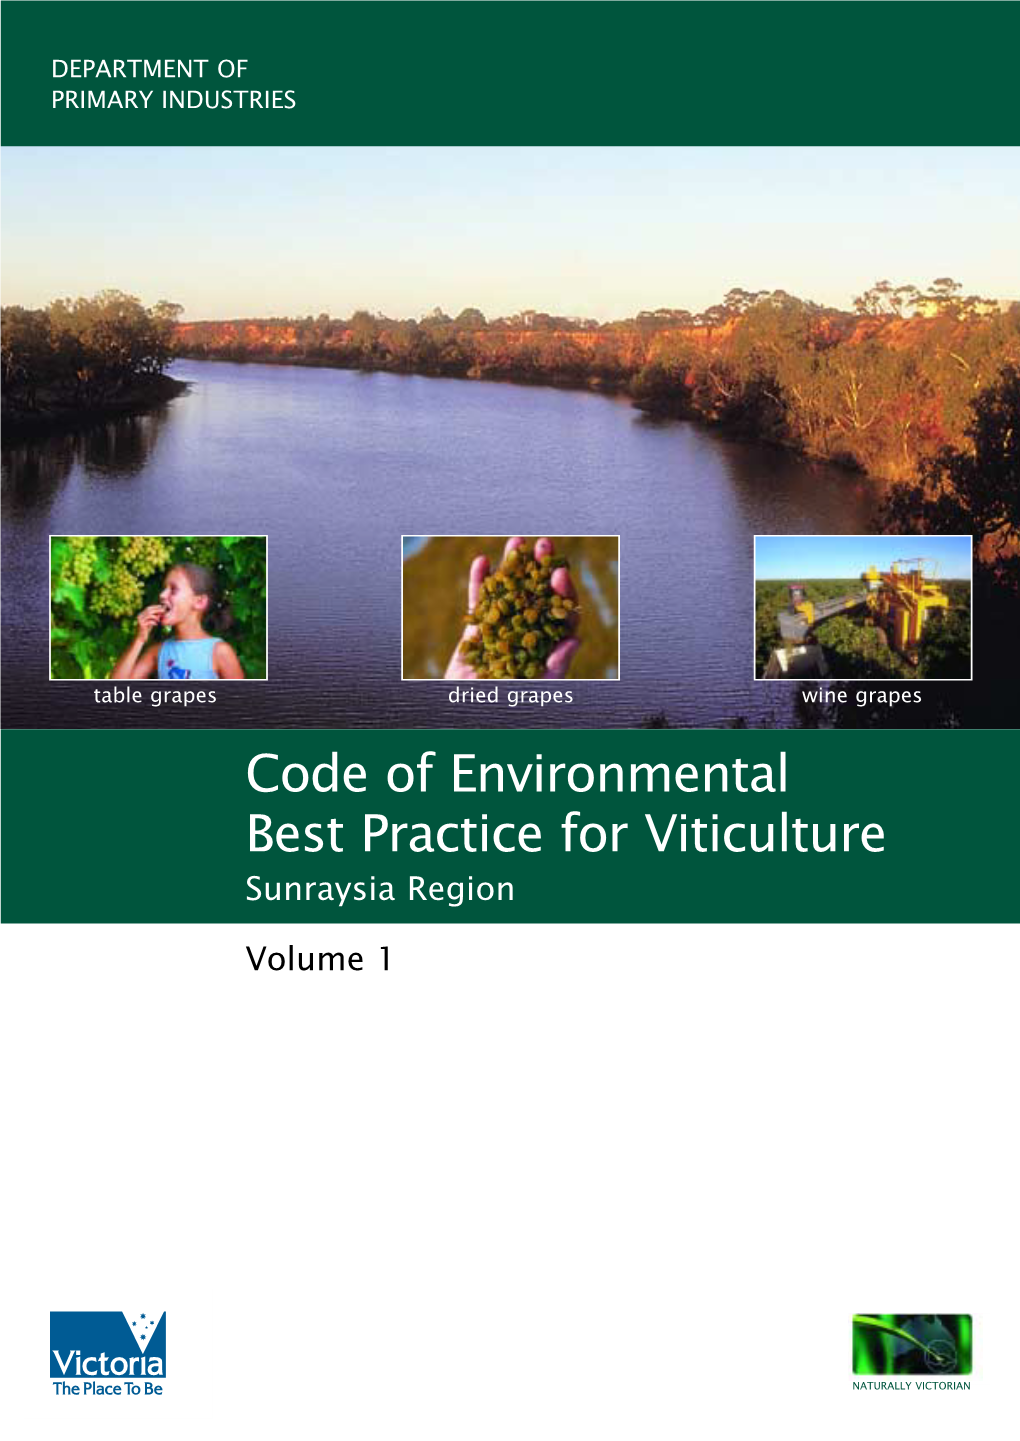 Code of Environmental Best Practice for Viticulture Sunraysia Region